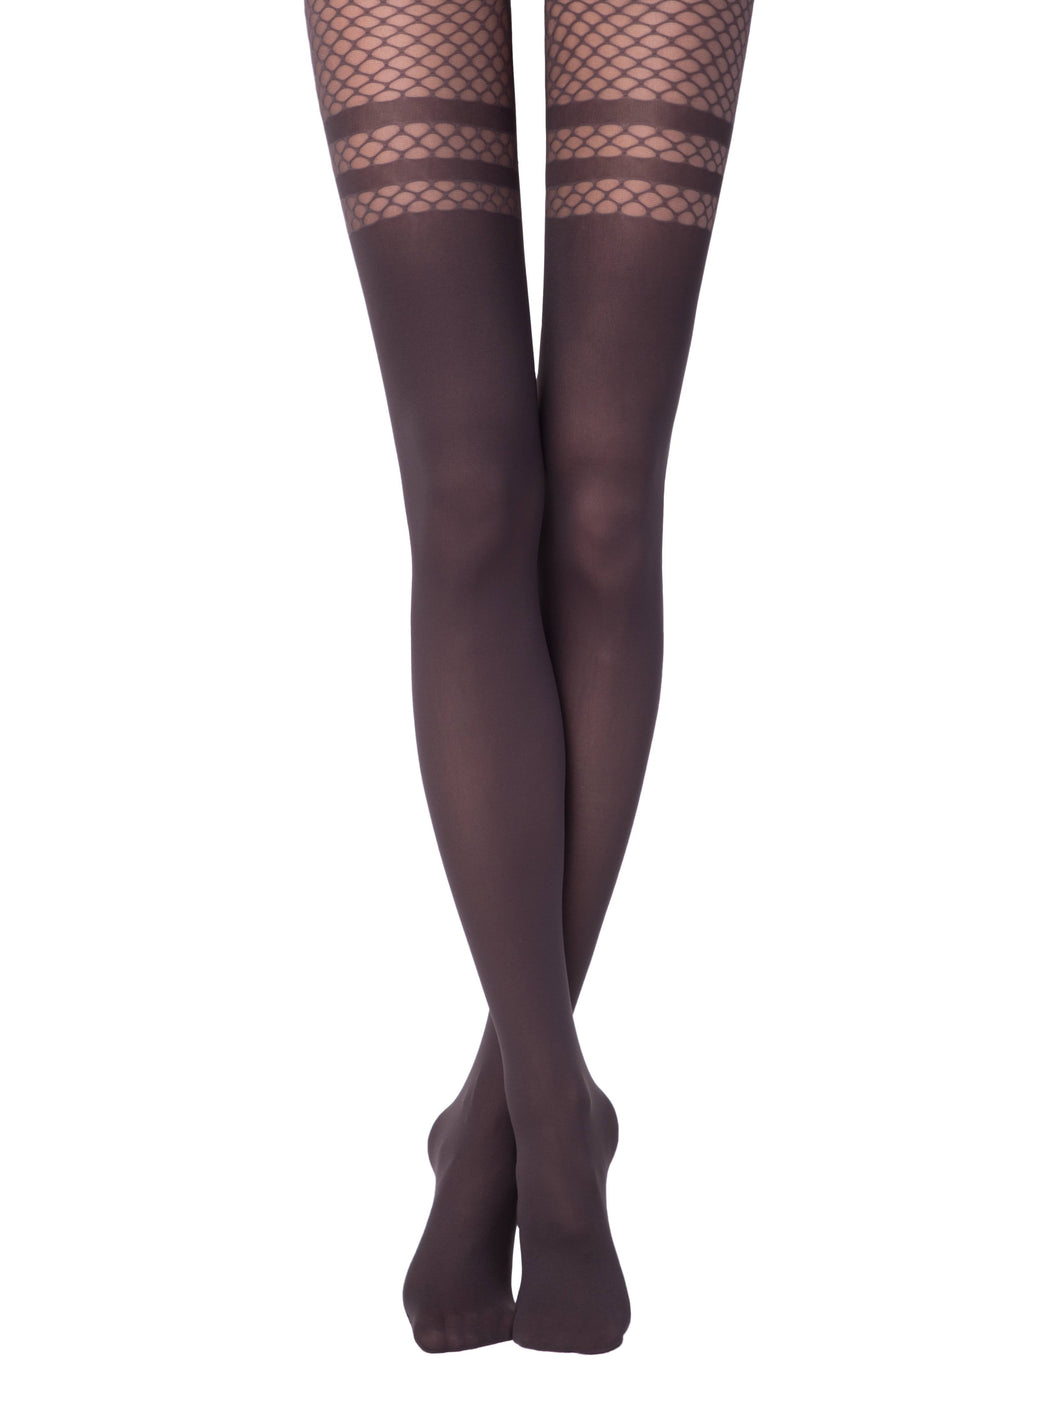 Conte Impulse 60 Den - Fantasy Opaque Women's Tights with large mesh and imitation stockings (18С-13СП)